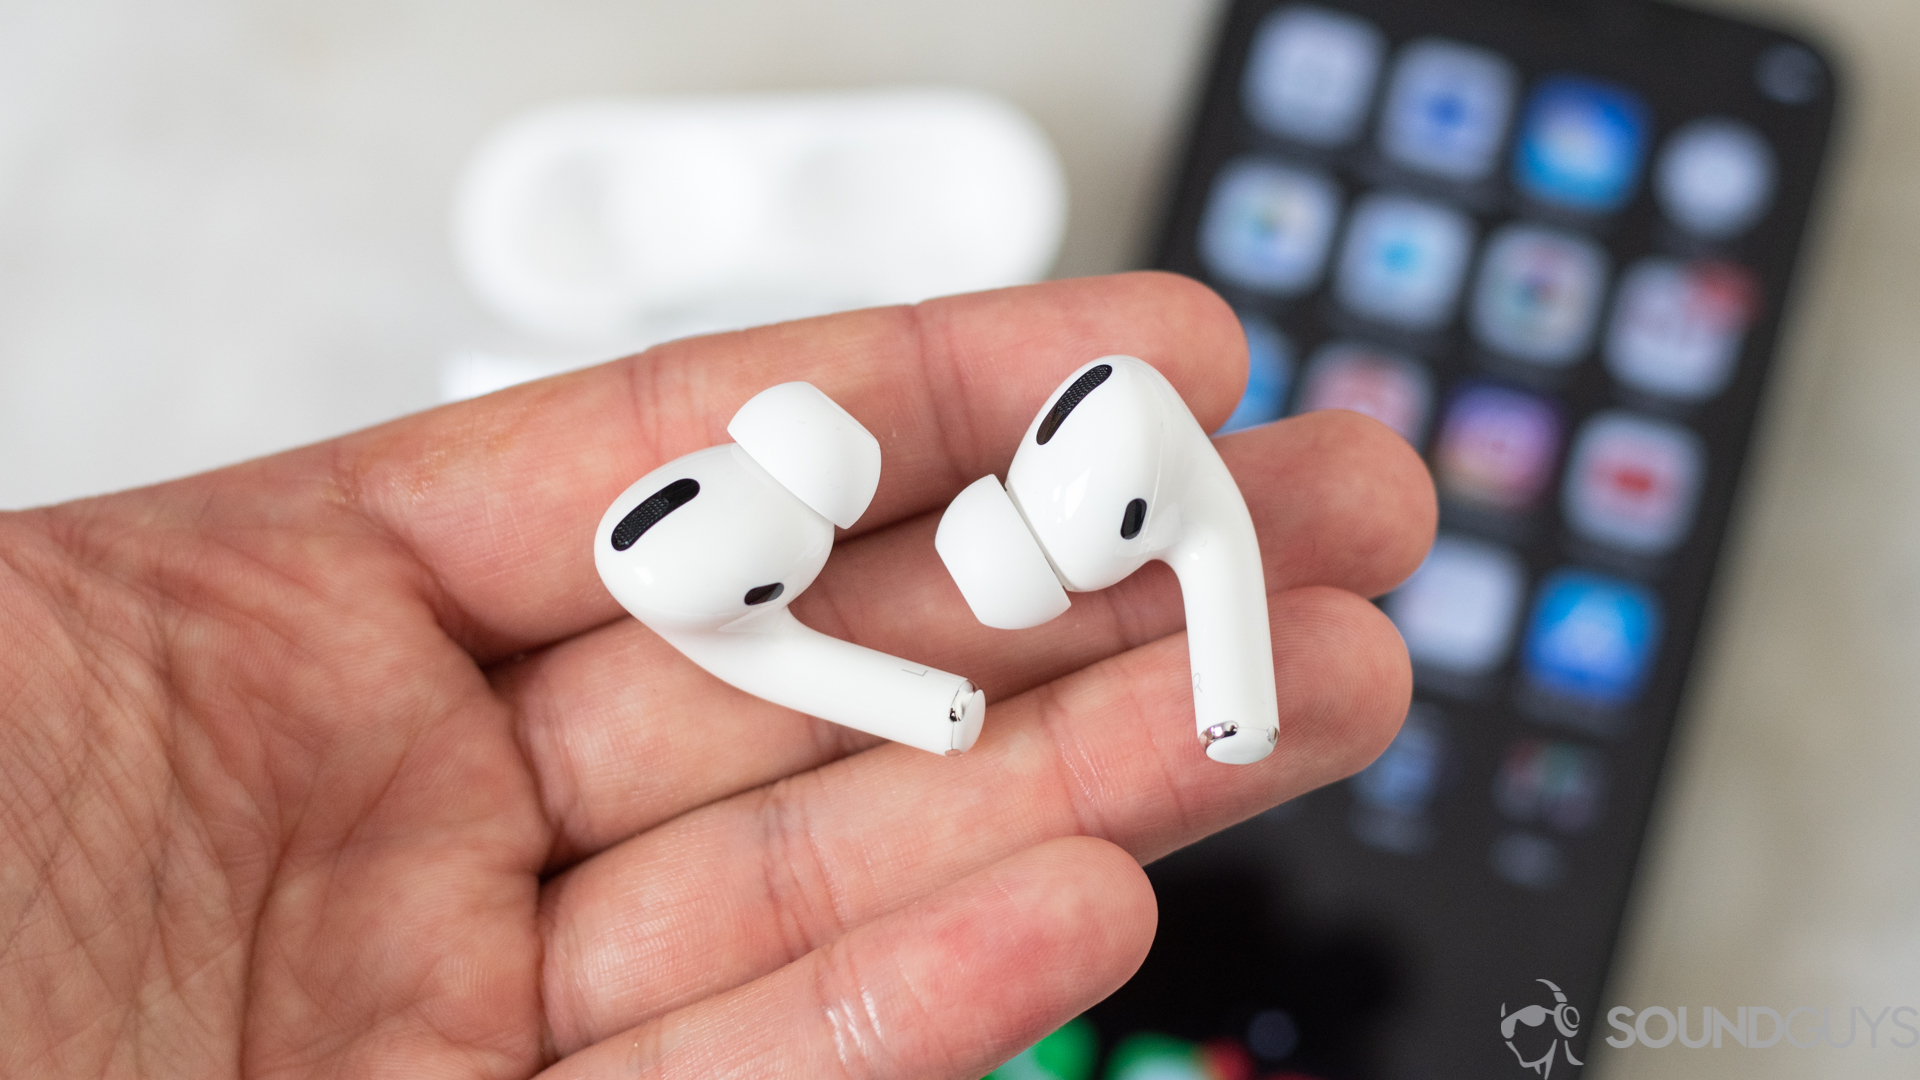 A picture of the Apple AirPods Pro in a man's left hand (foreground) with an iPhone and the AirPods Pro wireless charging case in the background.